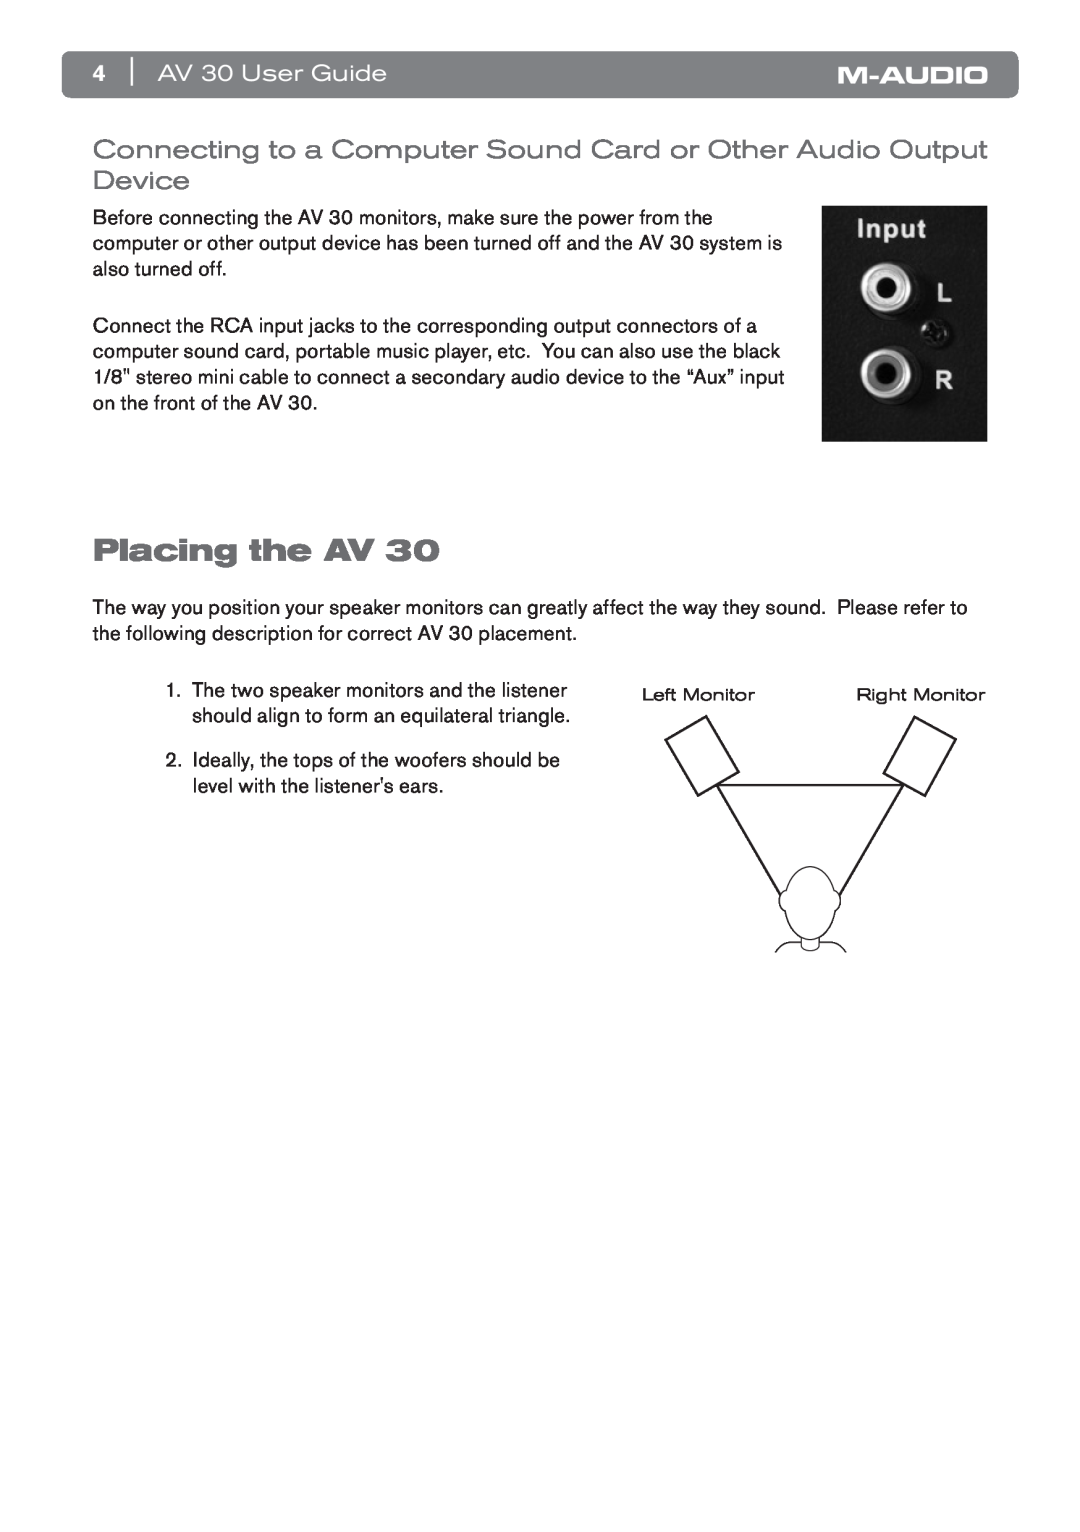 M-Audio manual Placing the AV, Connecting to a Computer Sound Card or Other Audio Output Device, AV 30 User Guide 